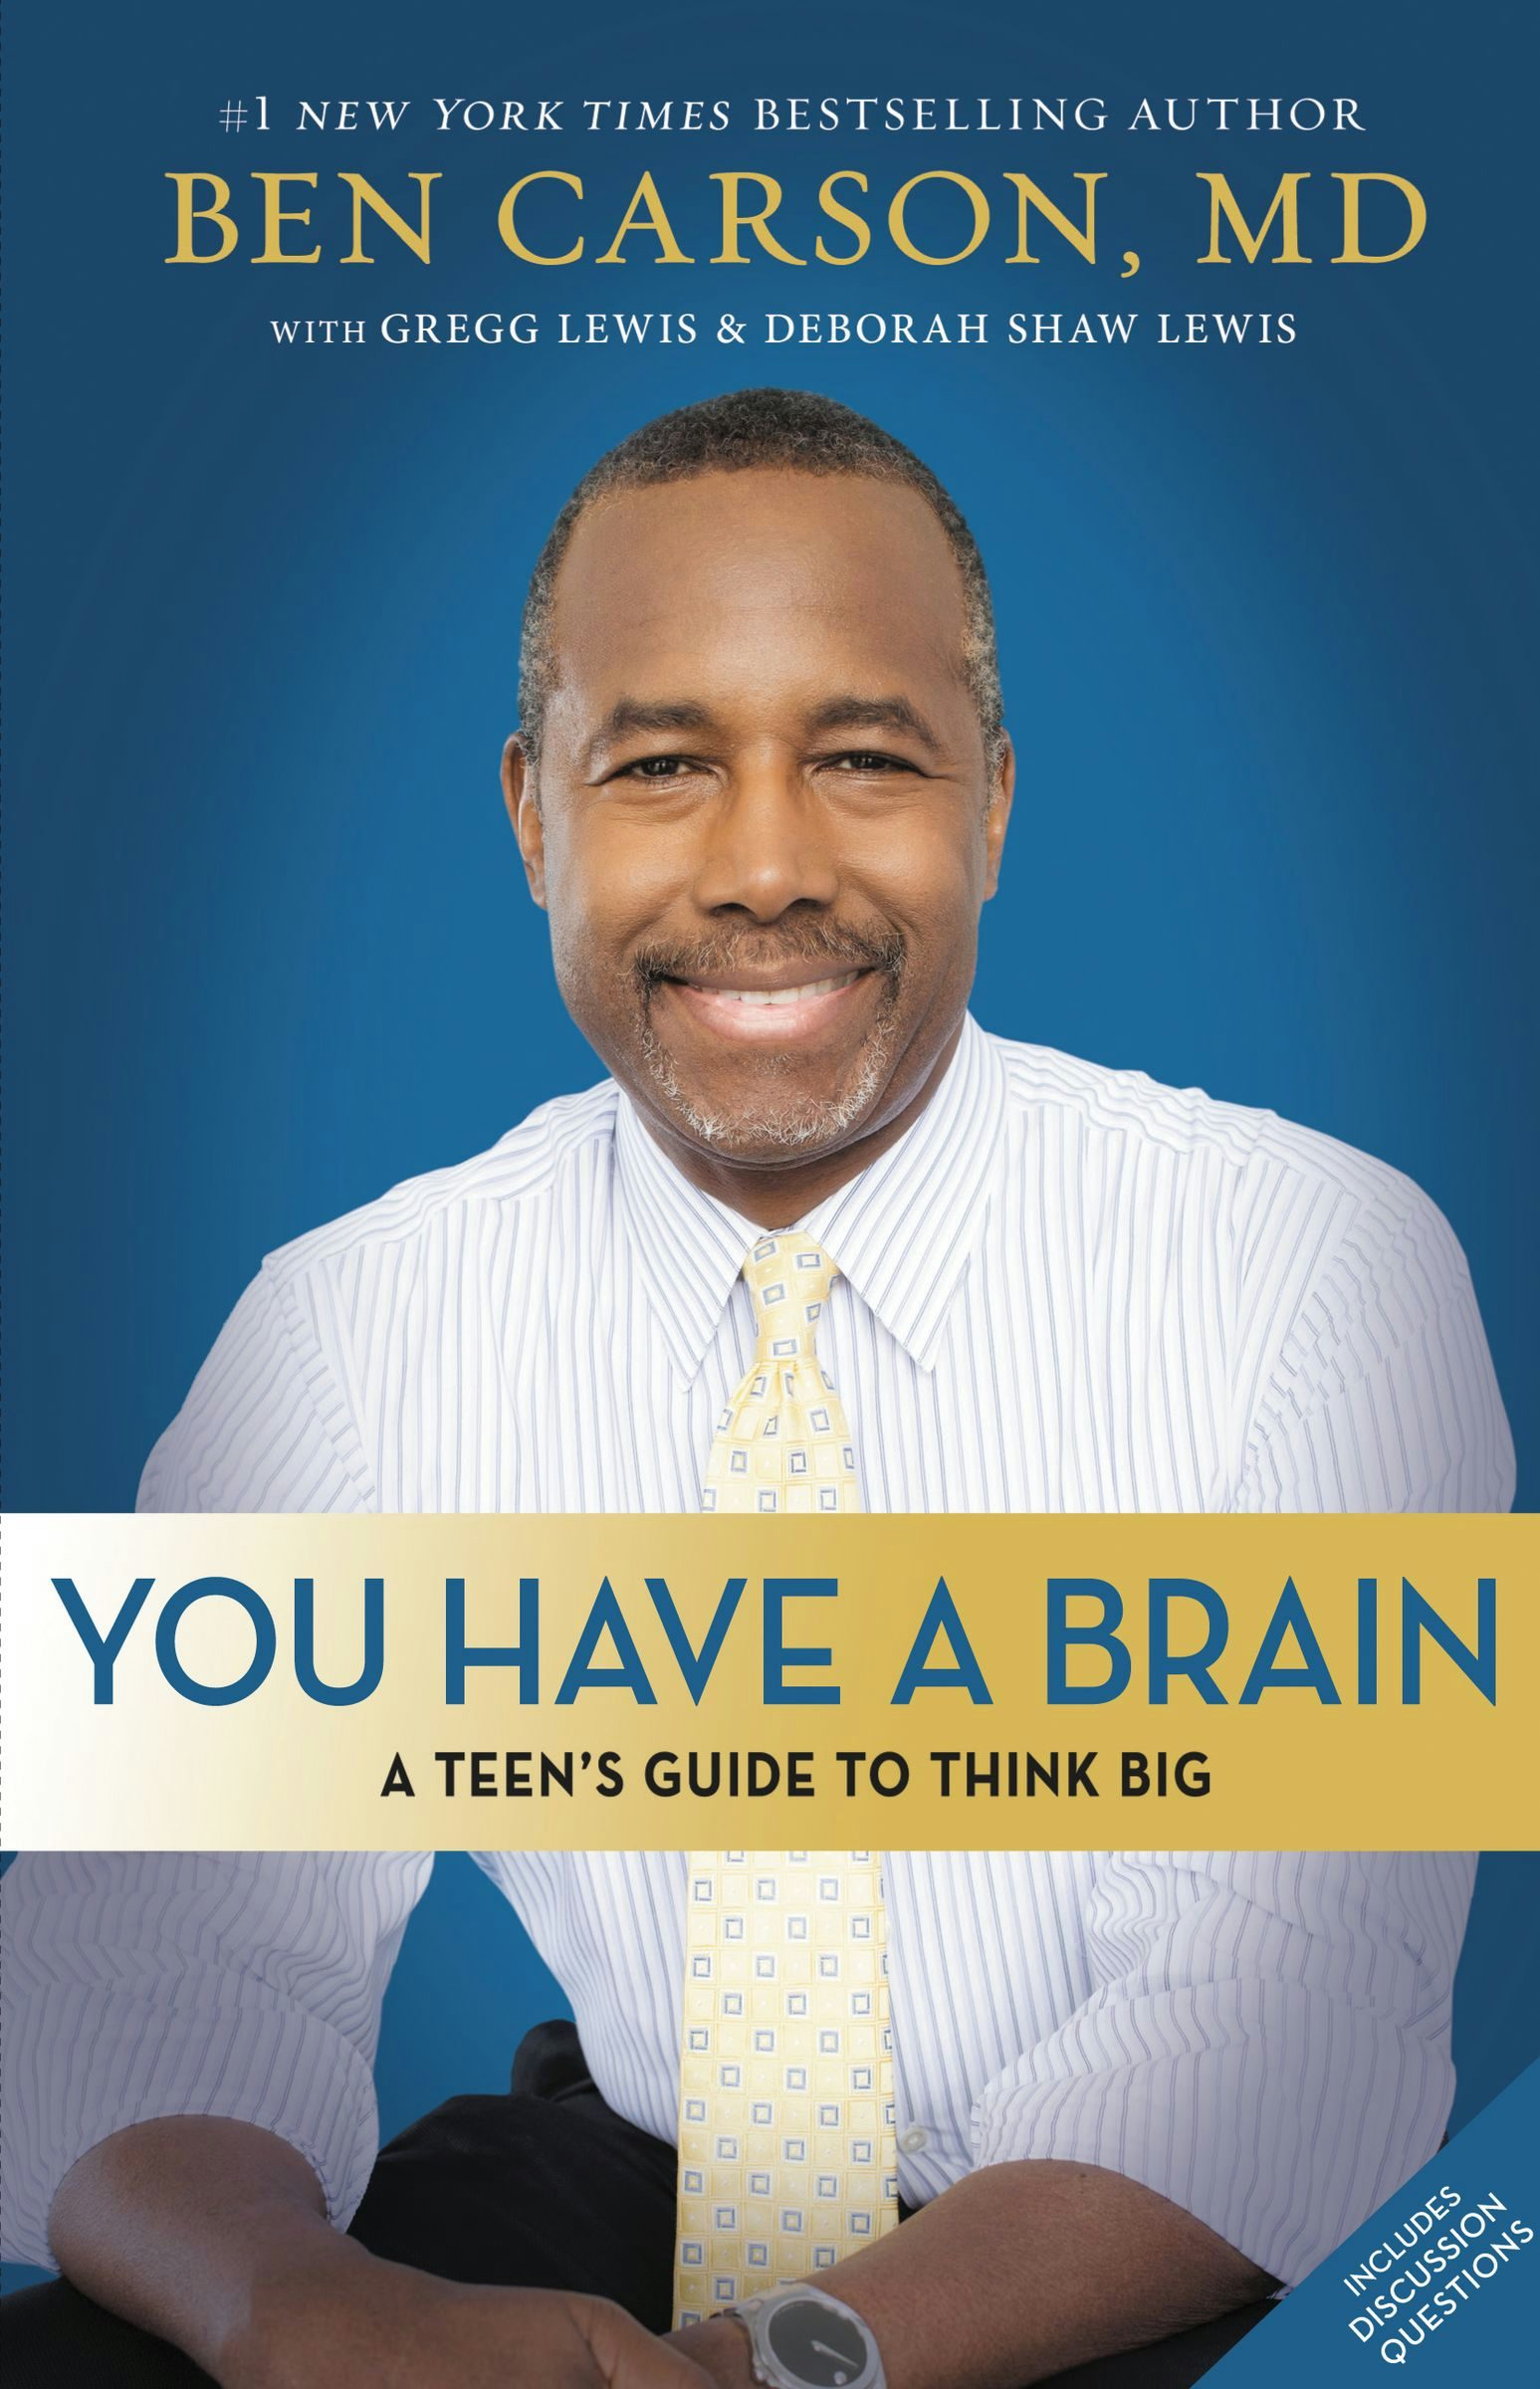 ben carson gifted hands book pdf